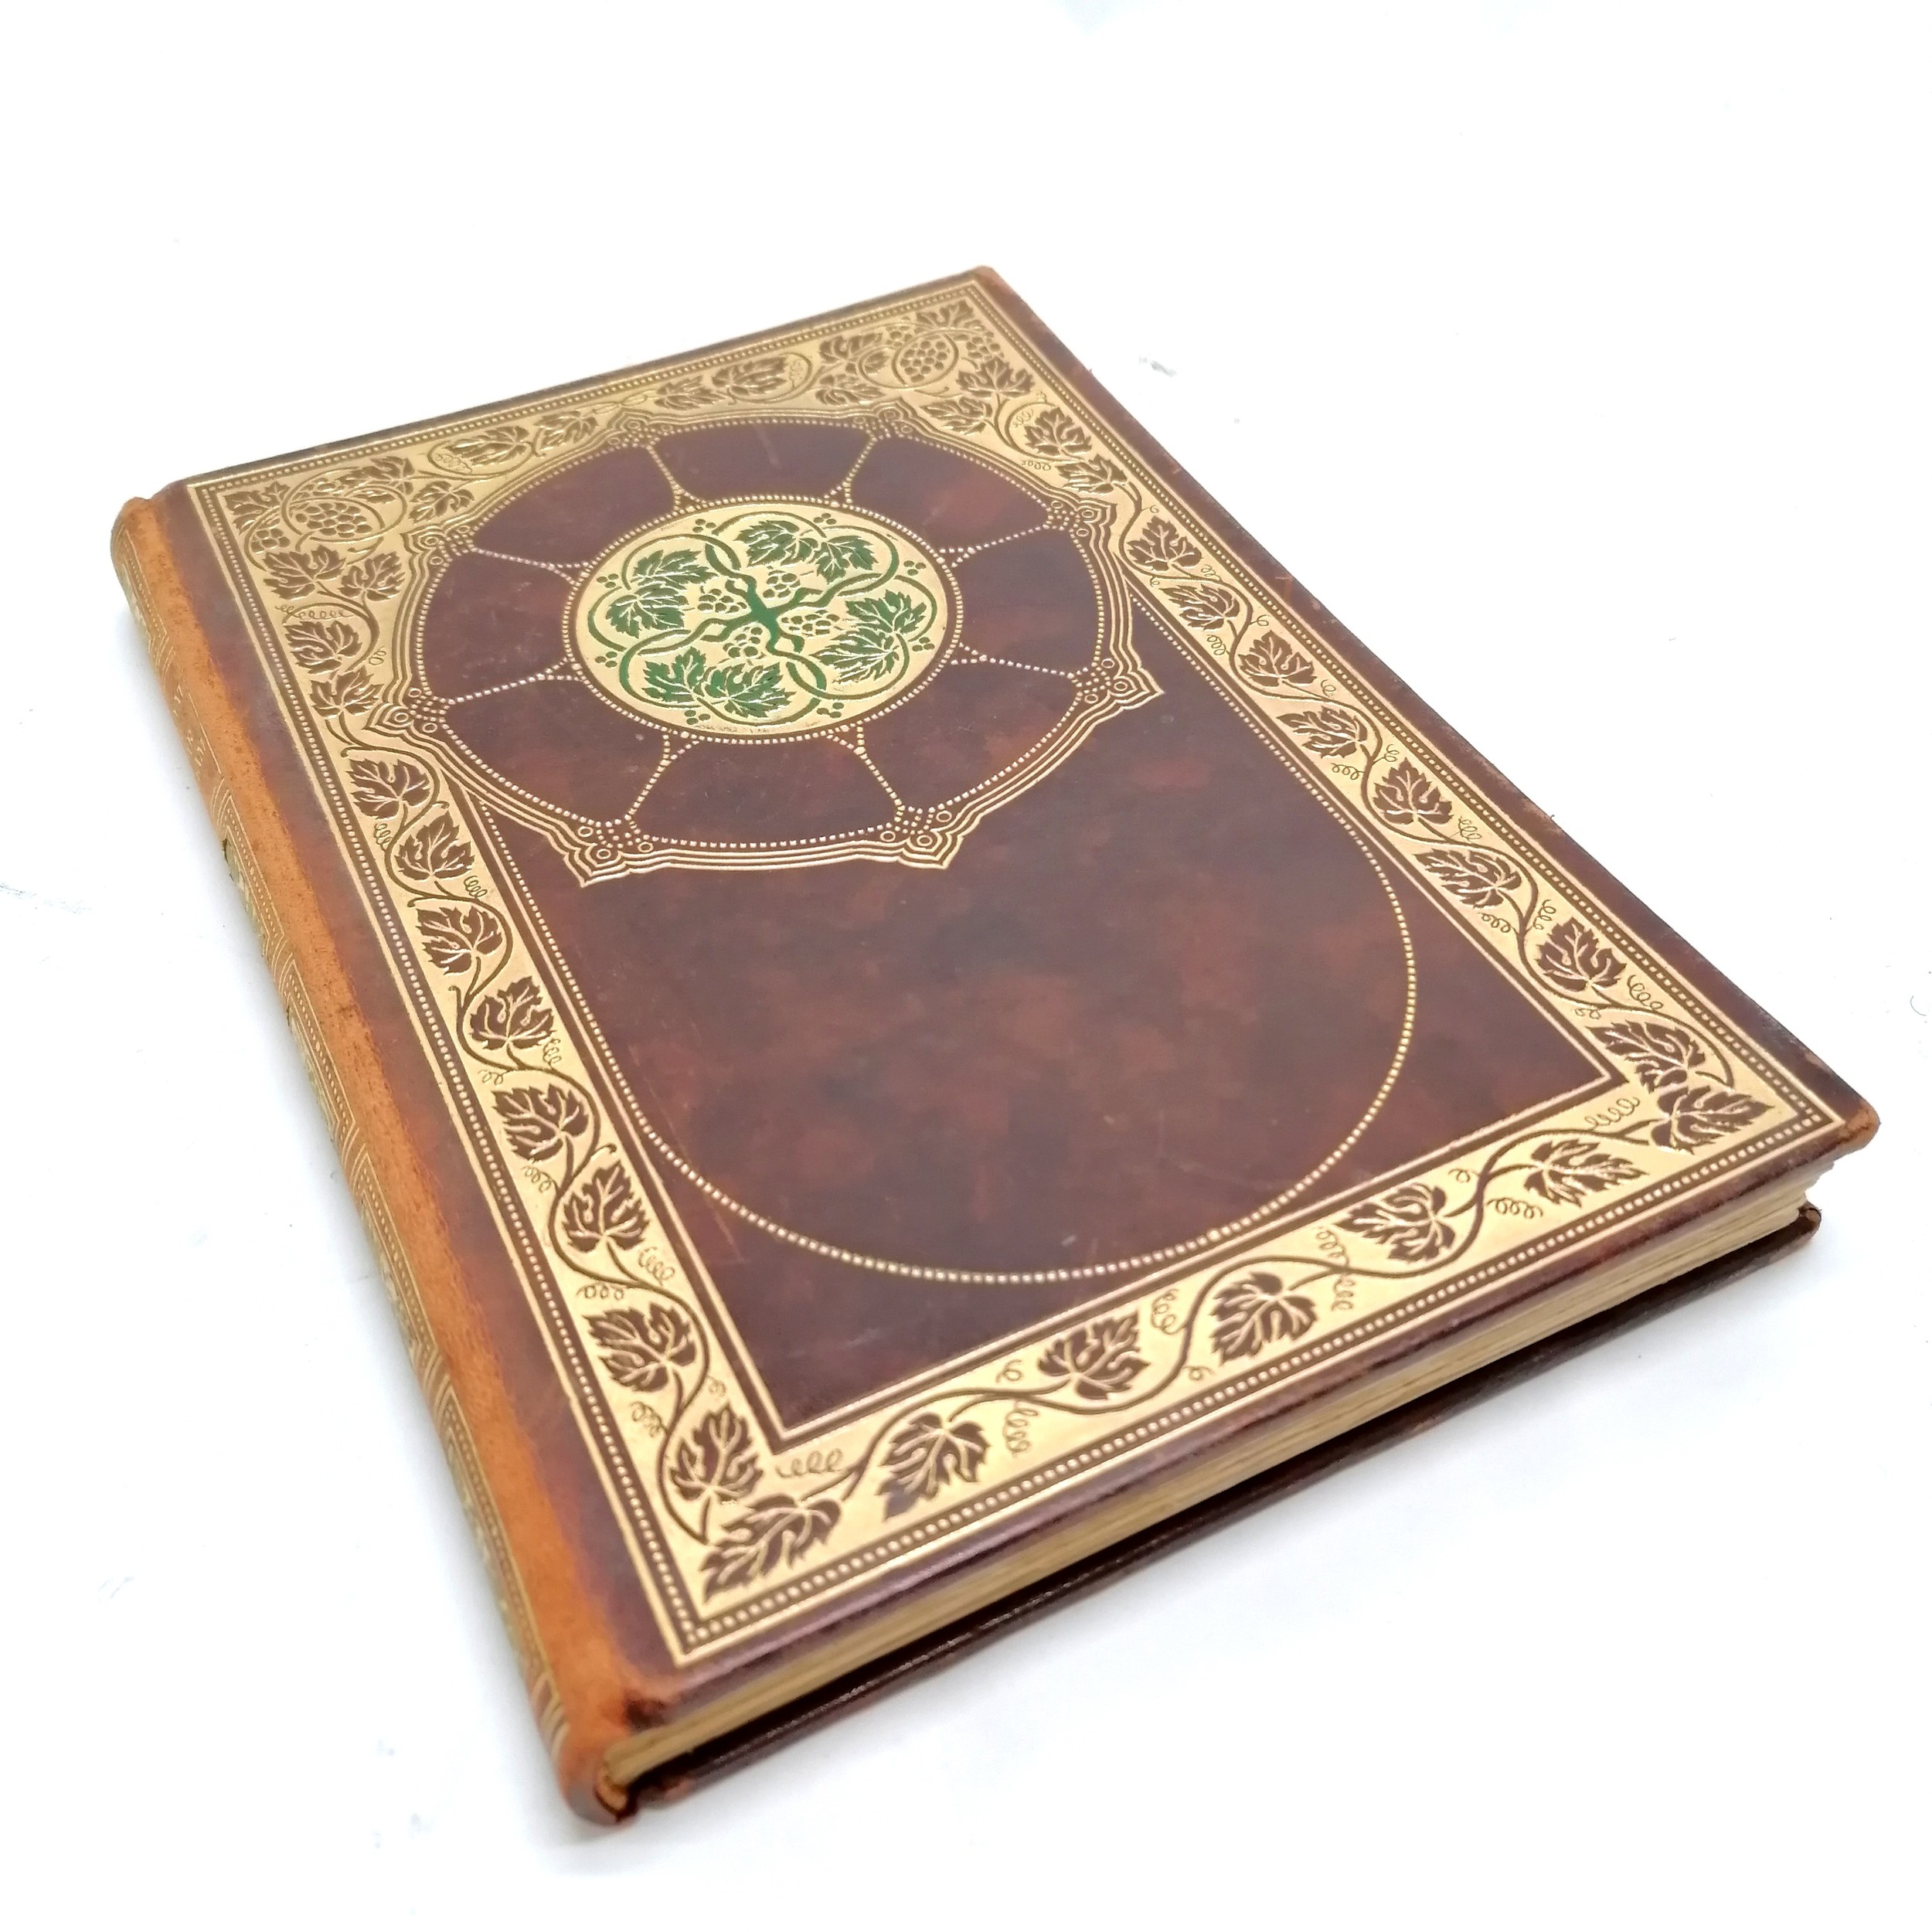 (1909+) Rubaiyat of Omar Khayyam (George Harrap) book with illustrations by William 'Willy' Andrew - Image 8 of 8